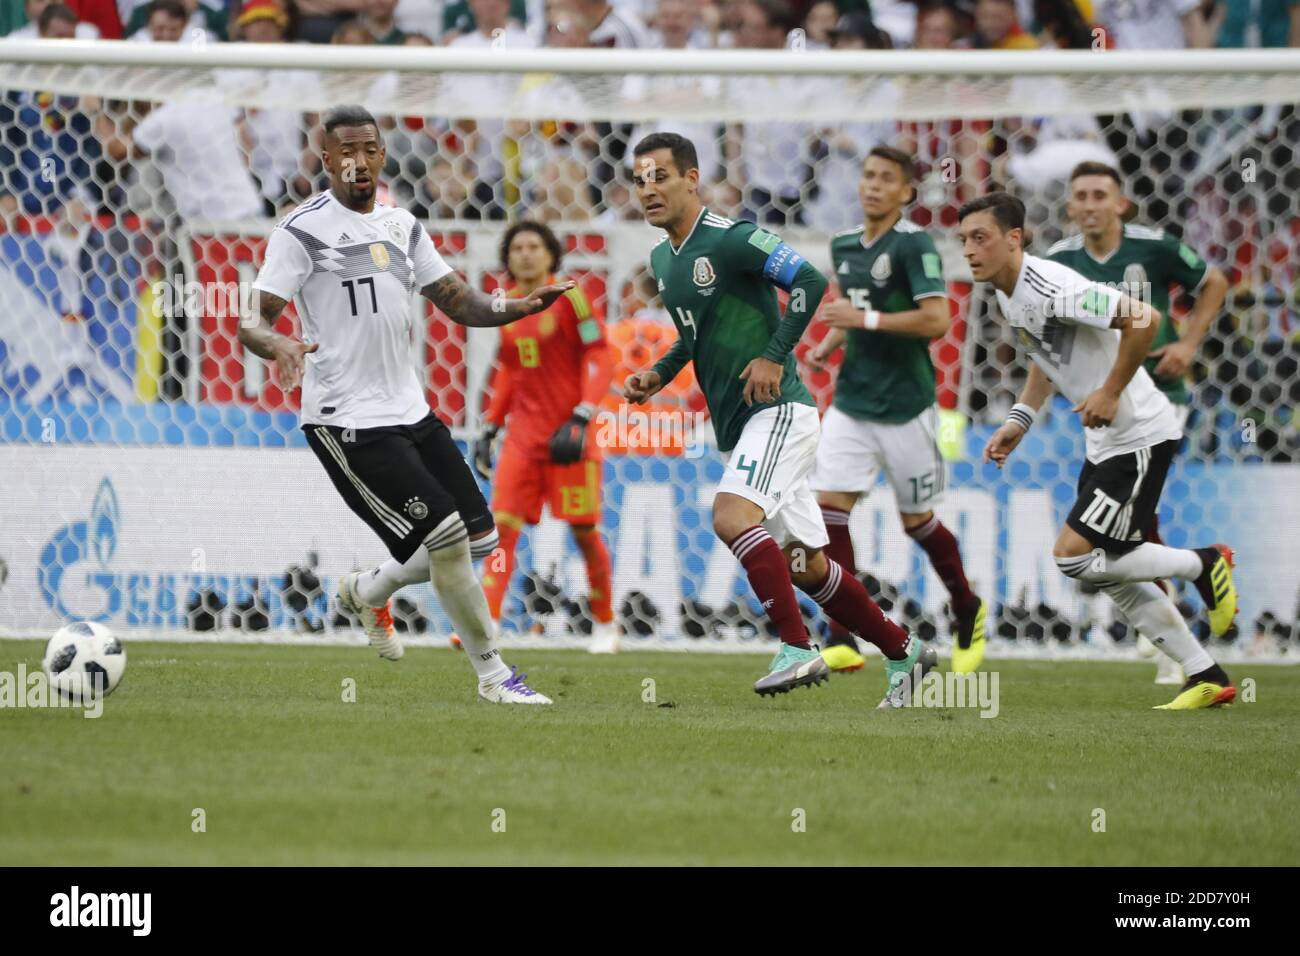 Germany's Jerome Boateng and Mesut Oezil battles Mexico's Rafael Marquez during the 2018 FIFA World Cup Russia game, Germany vs Mexico in Luzhniky Stadium, Moscow, Russia on June 17, 2018. Mexico won 1-0. Photo by Henri Szwarc/ABACAPRESS.COM Stock Photo